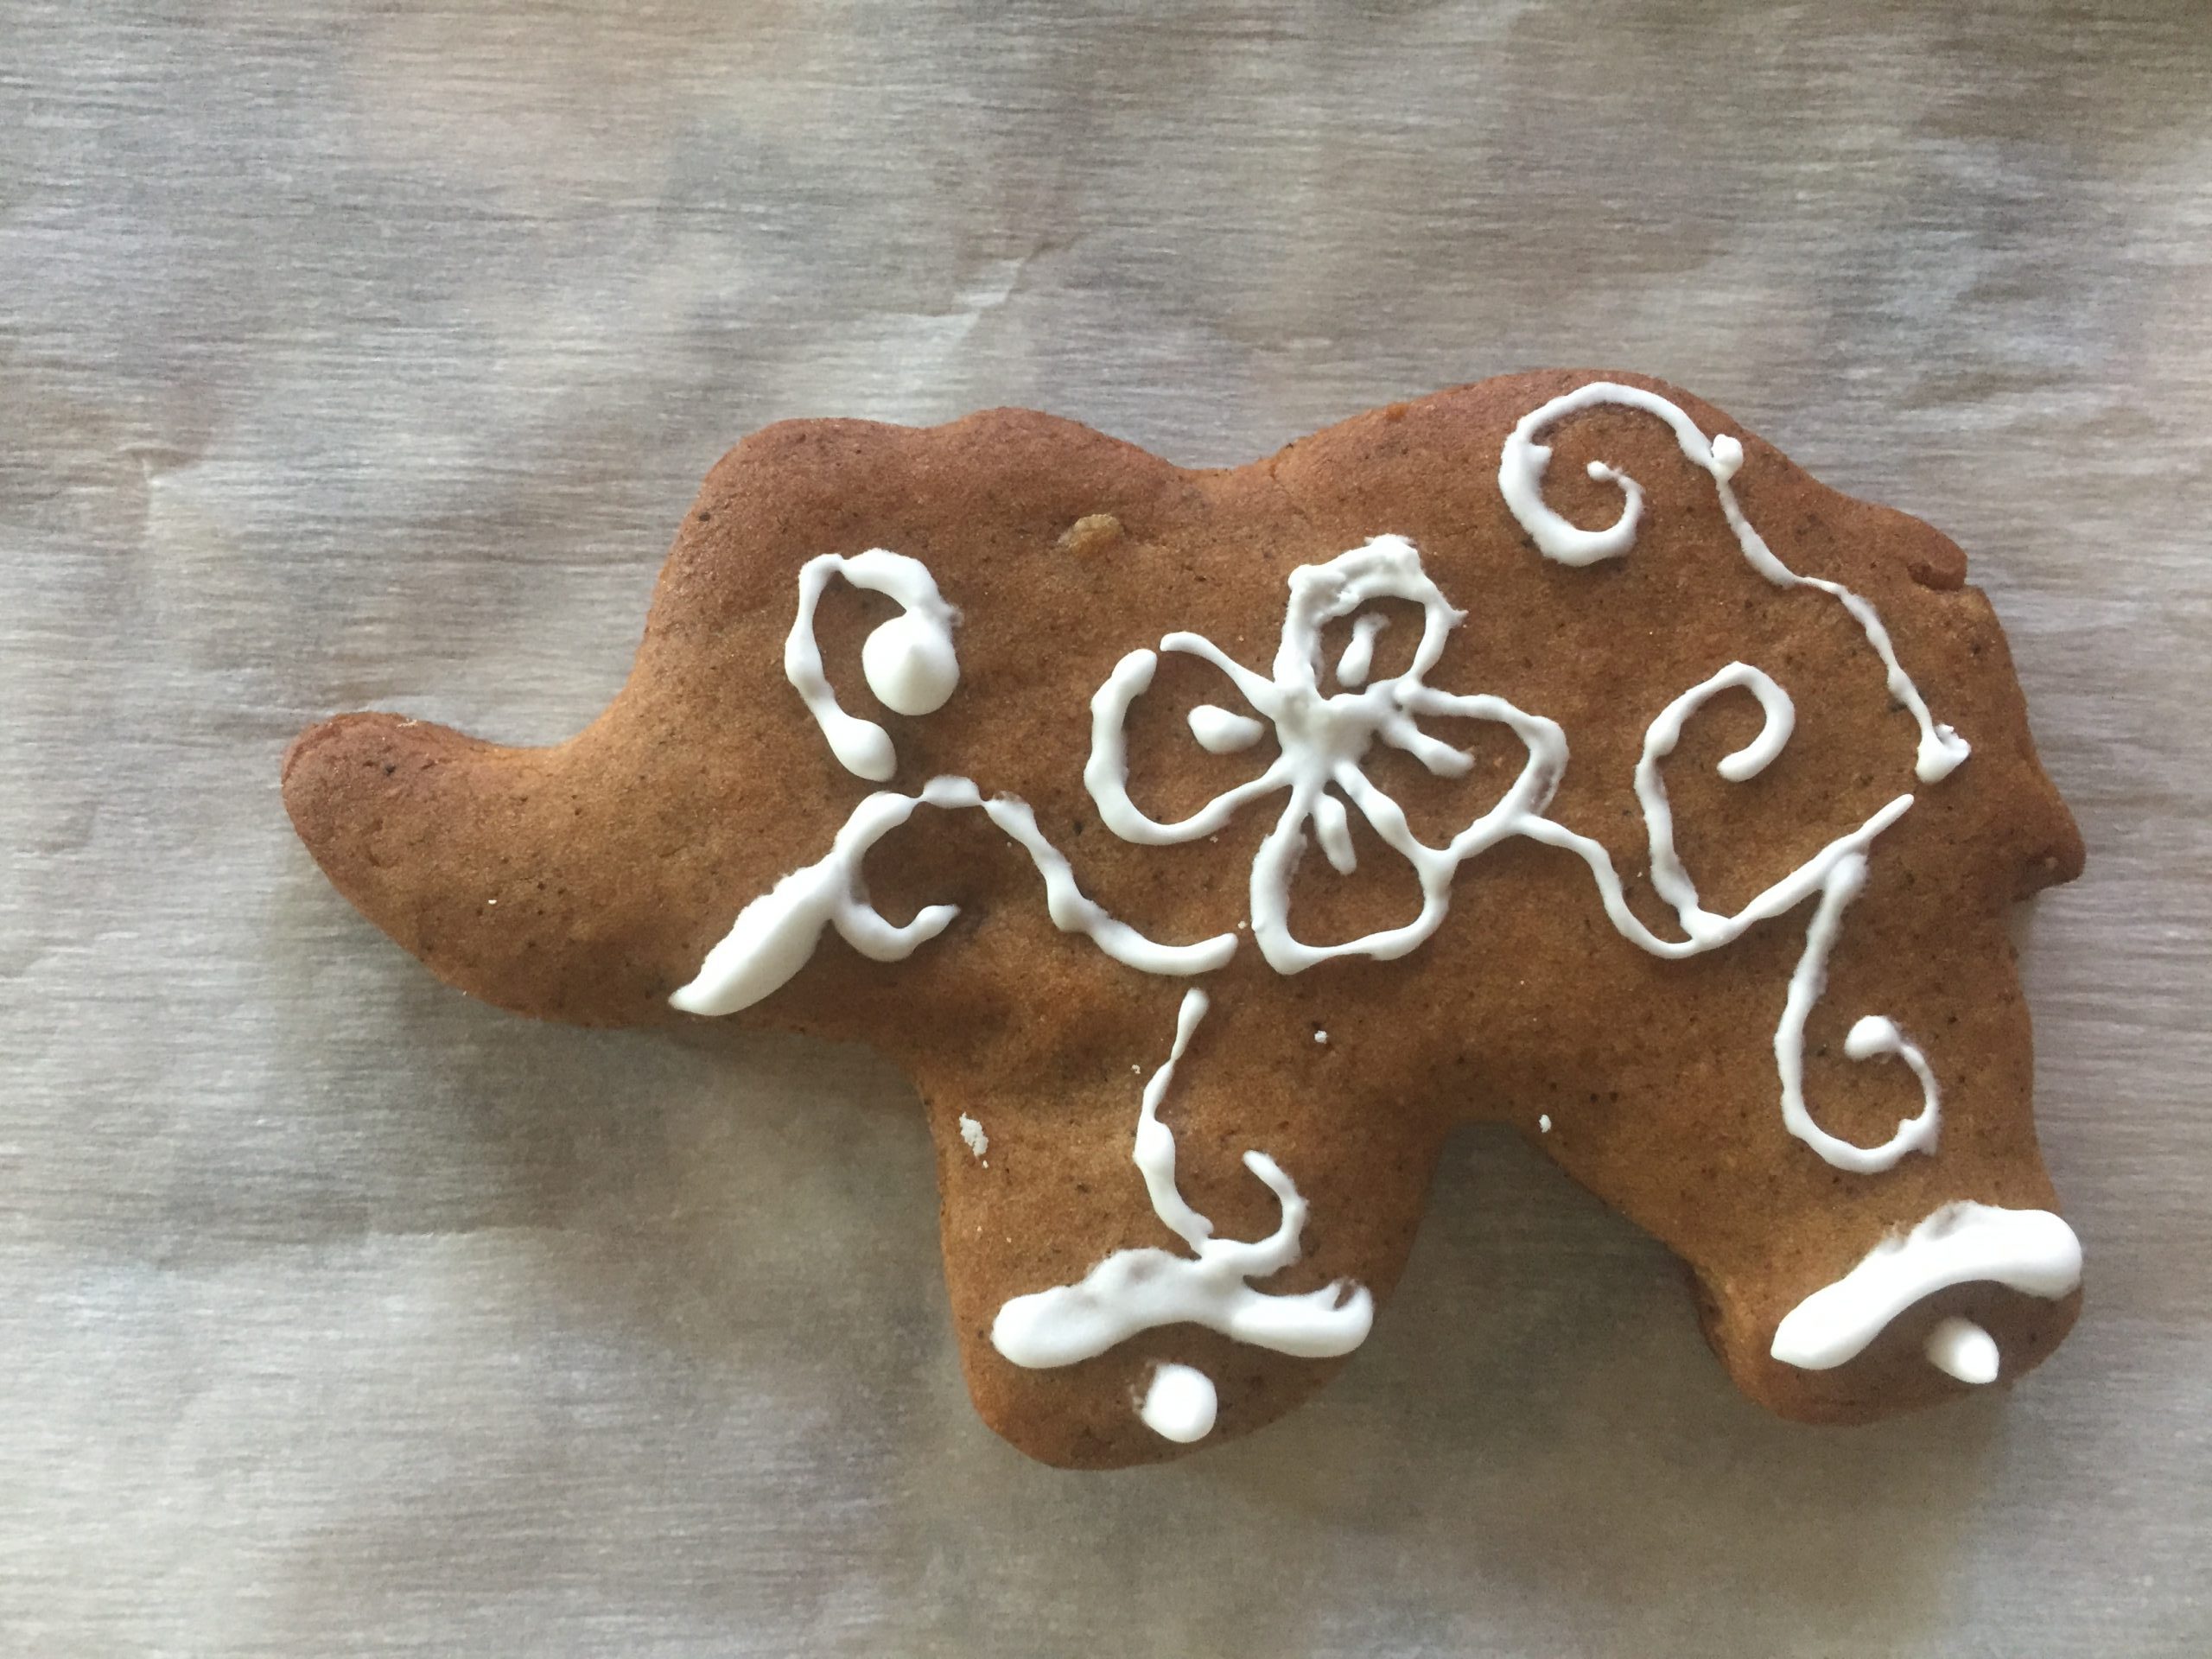 Gingerbread cookie without sourdough